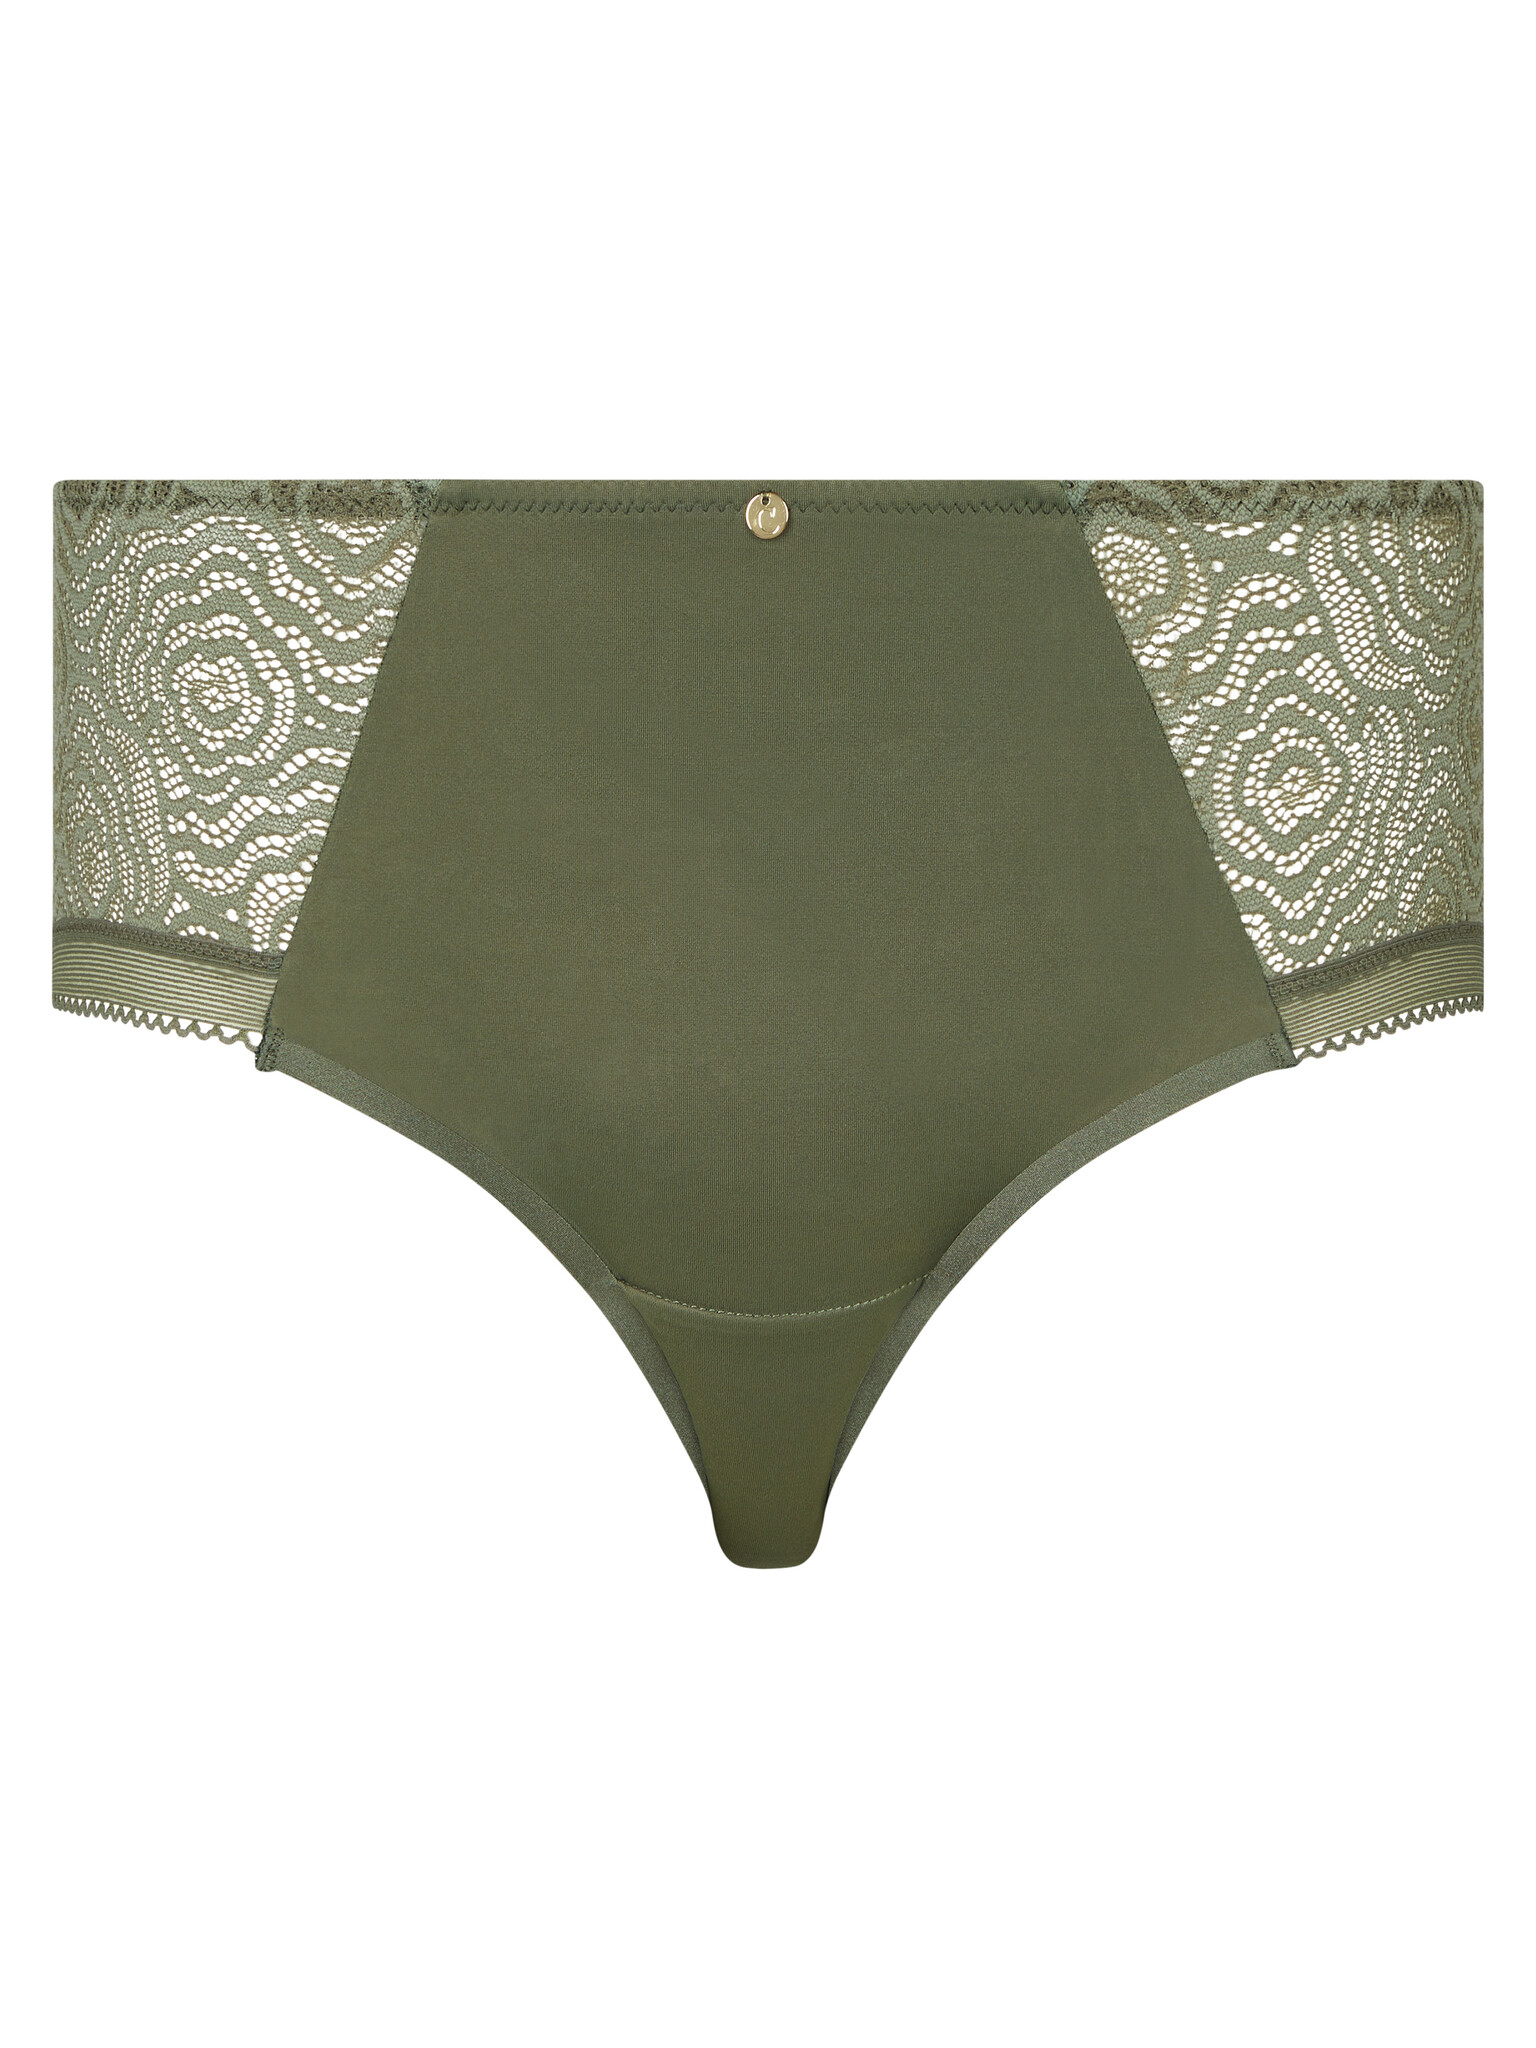 C-Jolie Lace Hipster Panty C13B40 Army Khaki (WQ) - Lace & Day